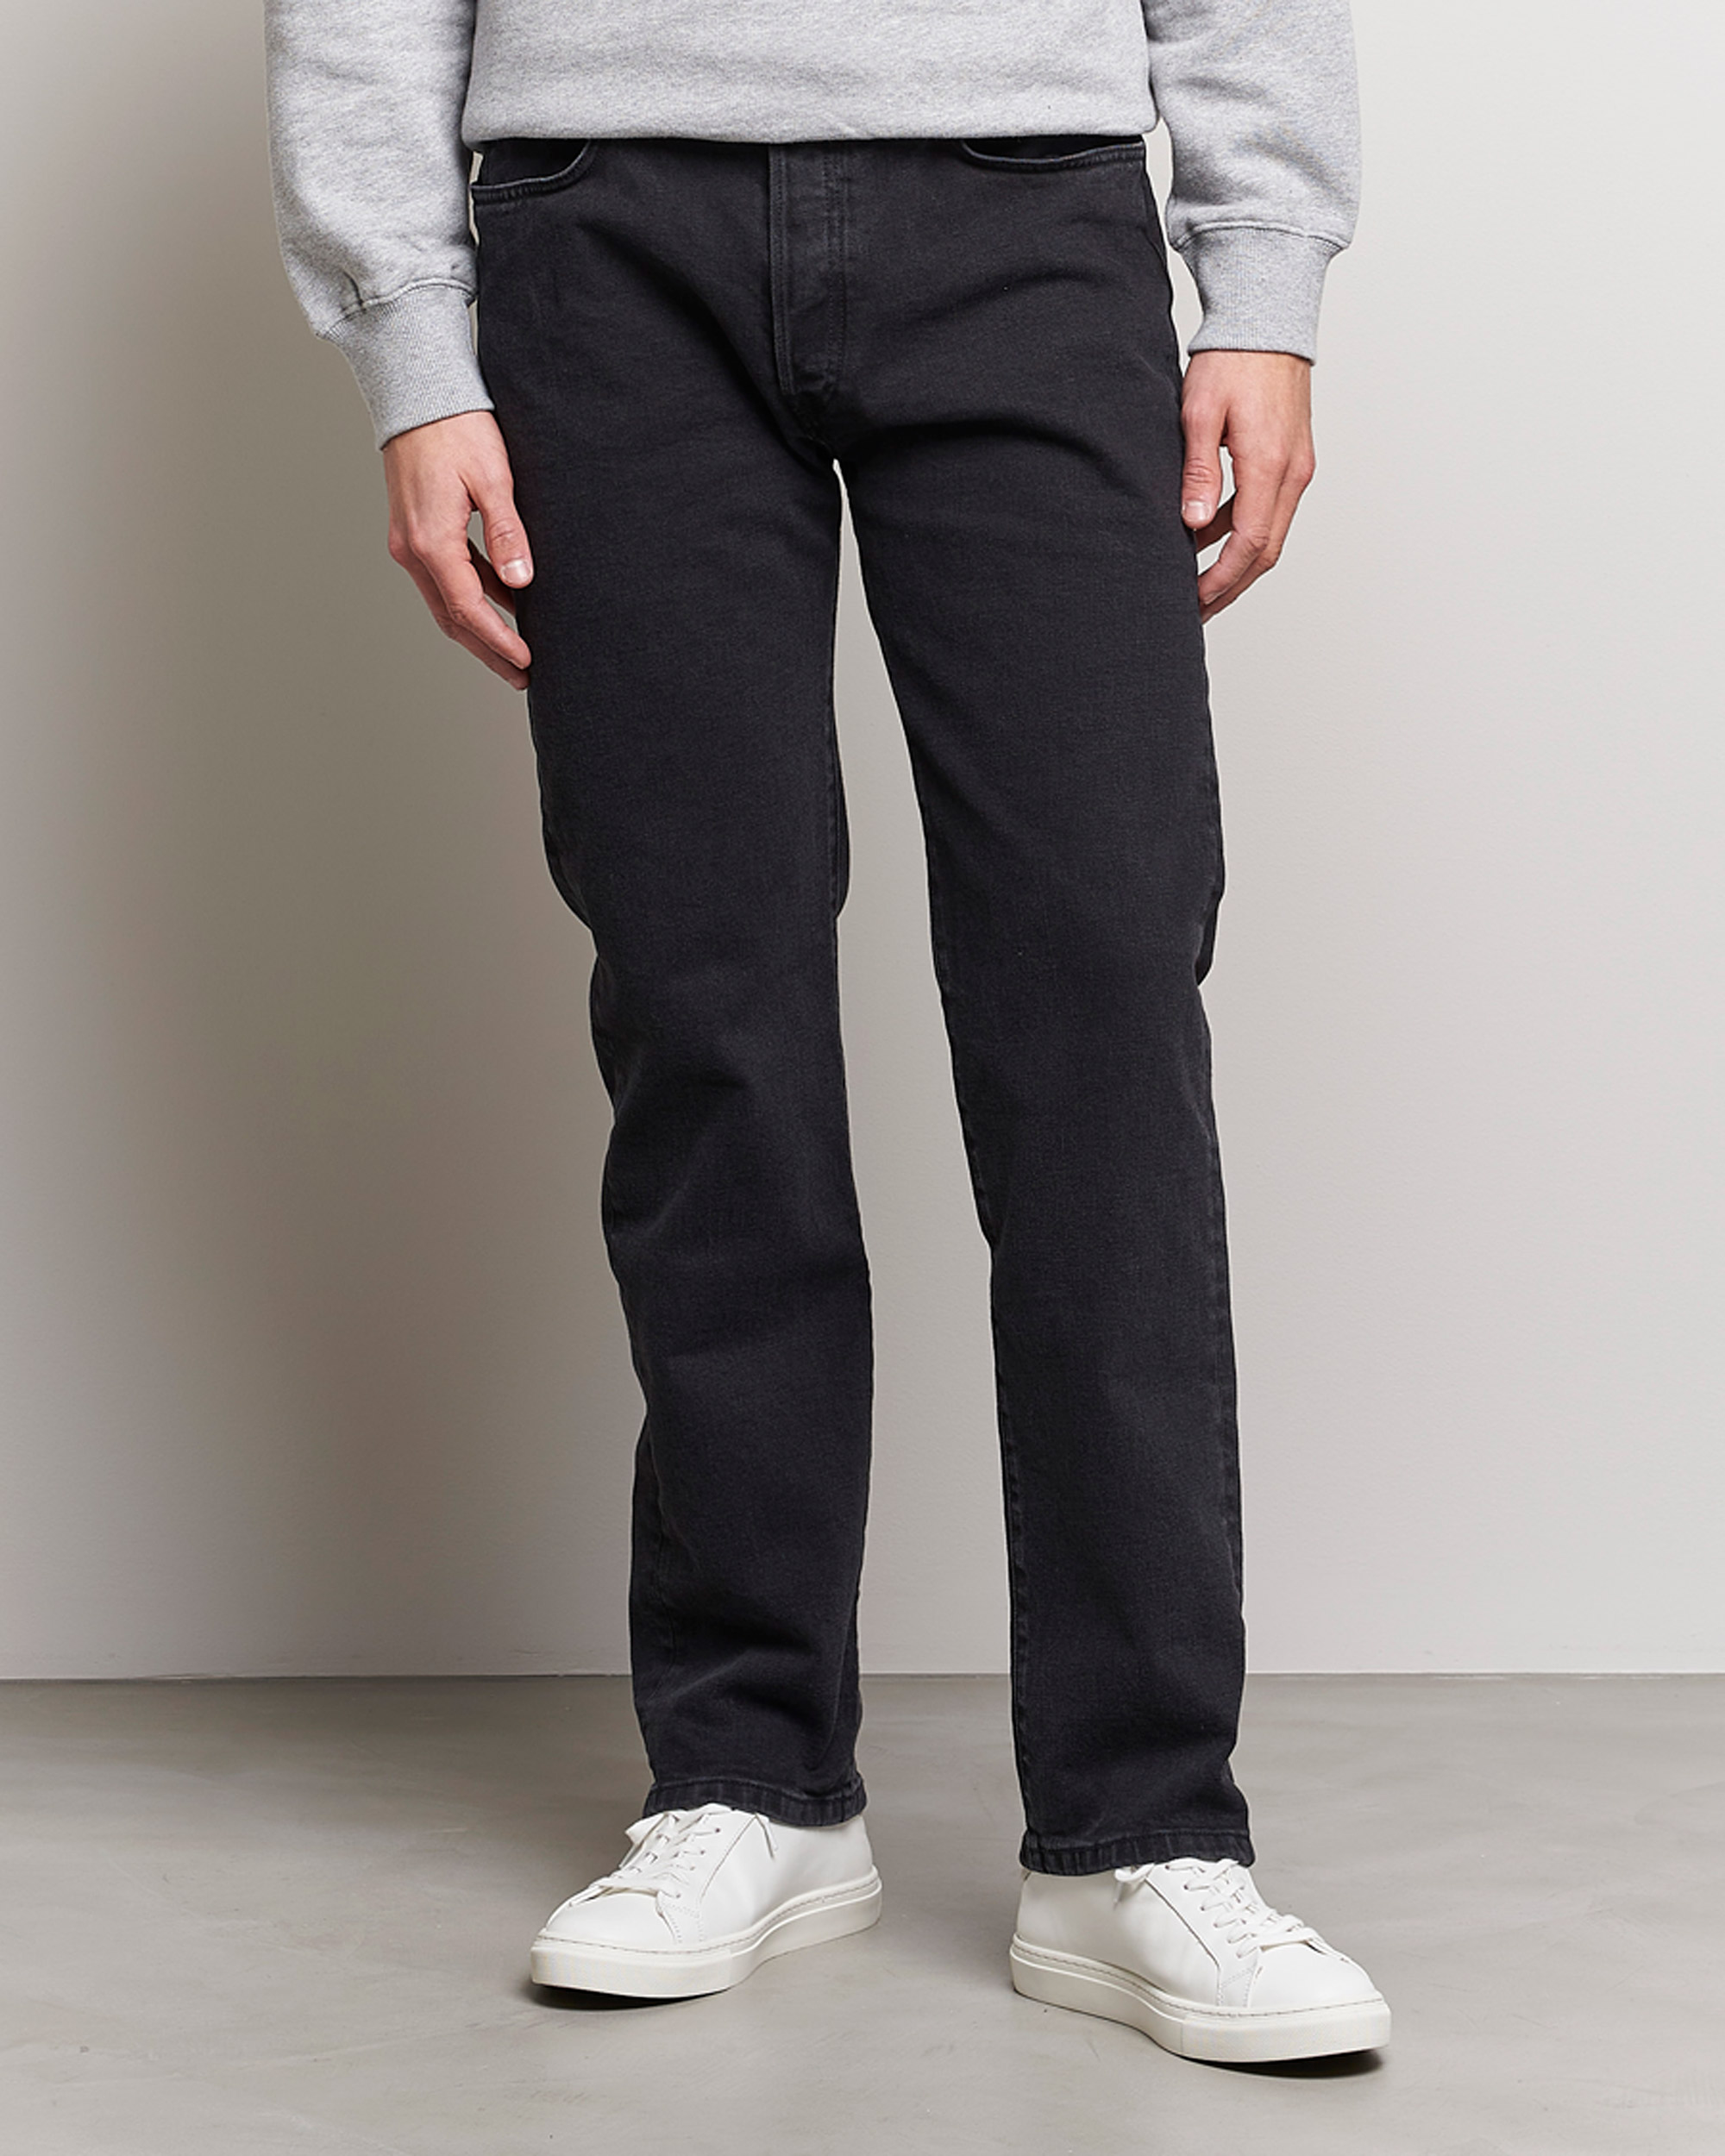 Hombres | Contemporary Creators | Jeanerica | CM002 Classic Jeans Black 2 Weeks